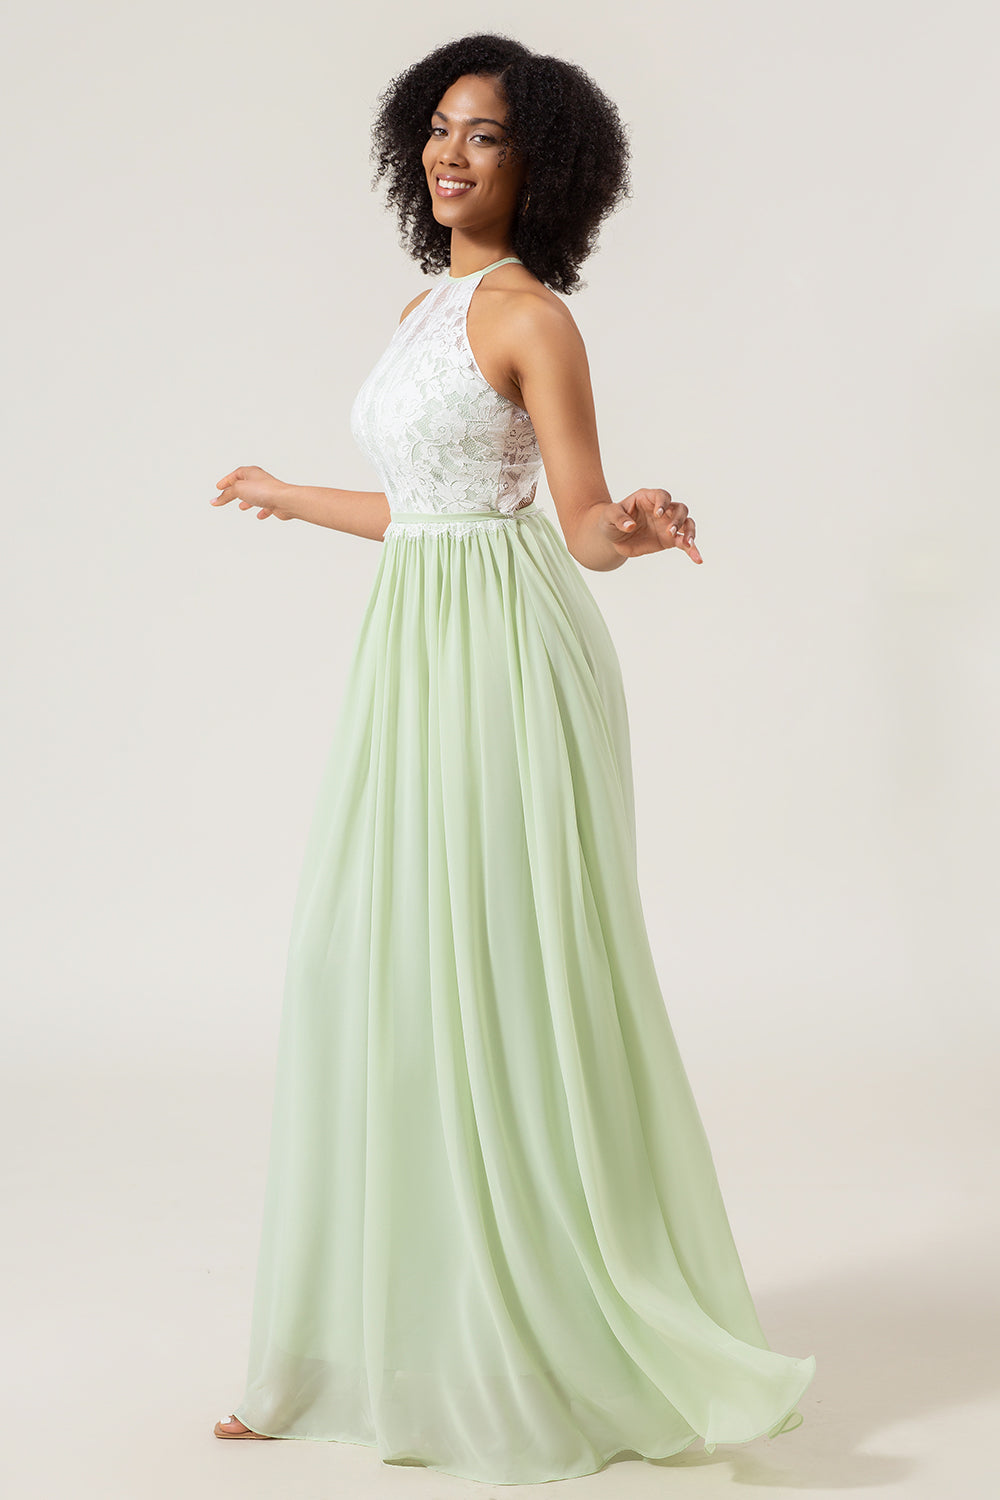 A-Line Halter Neck Dusty Sage Lace and Chiffon Long Bridesmaid Dress